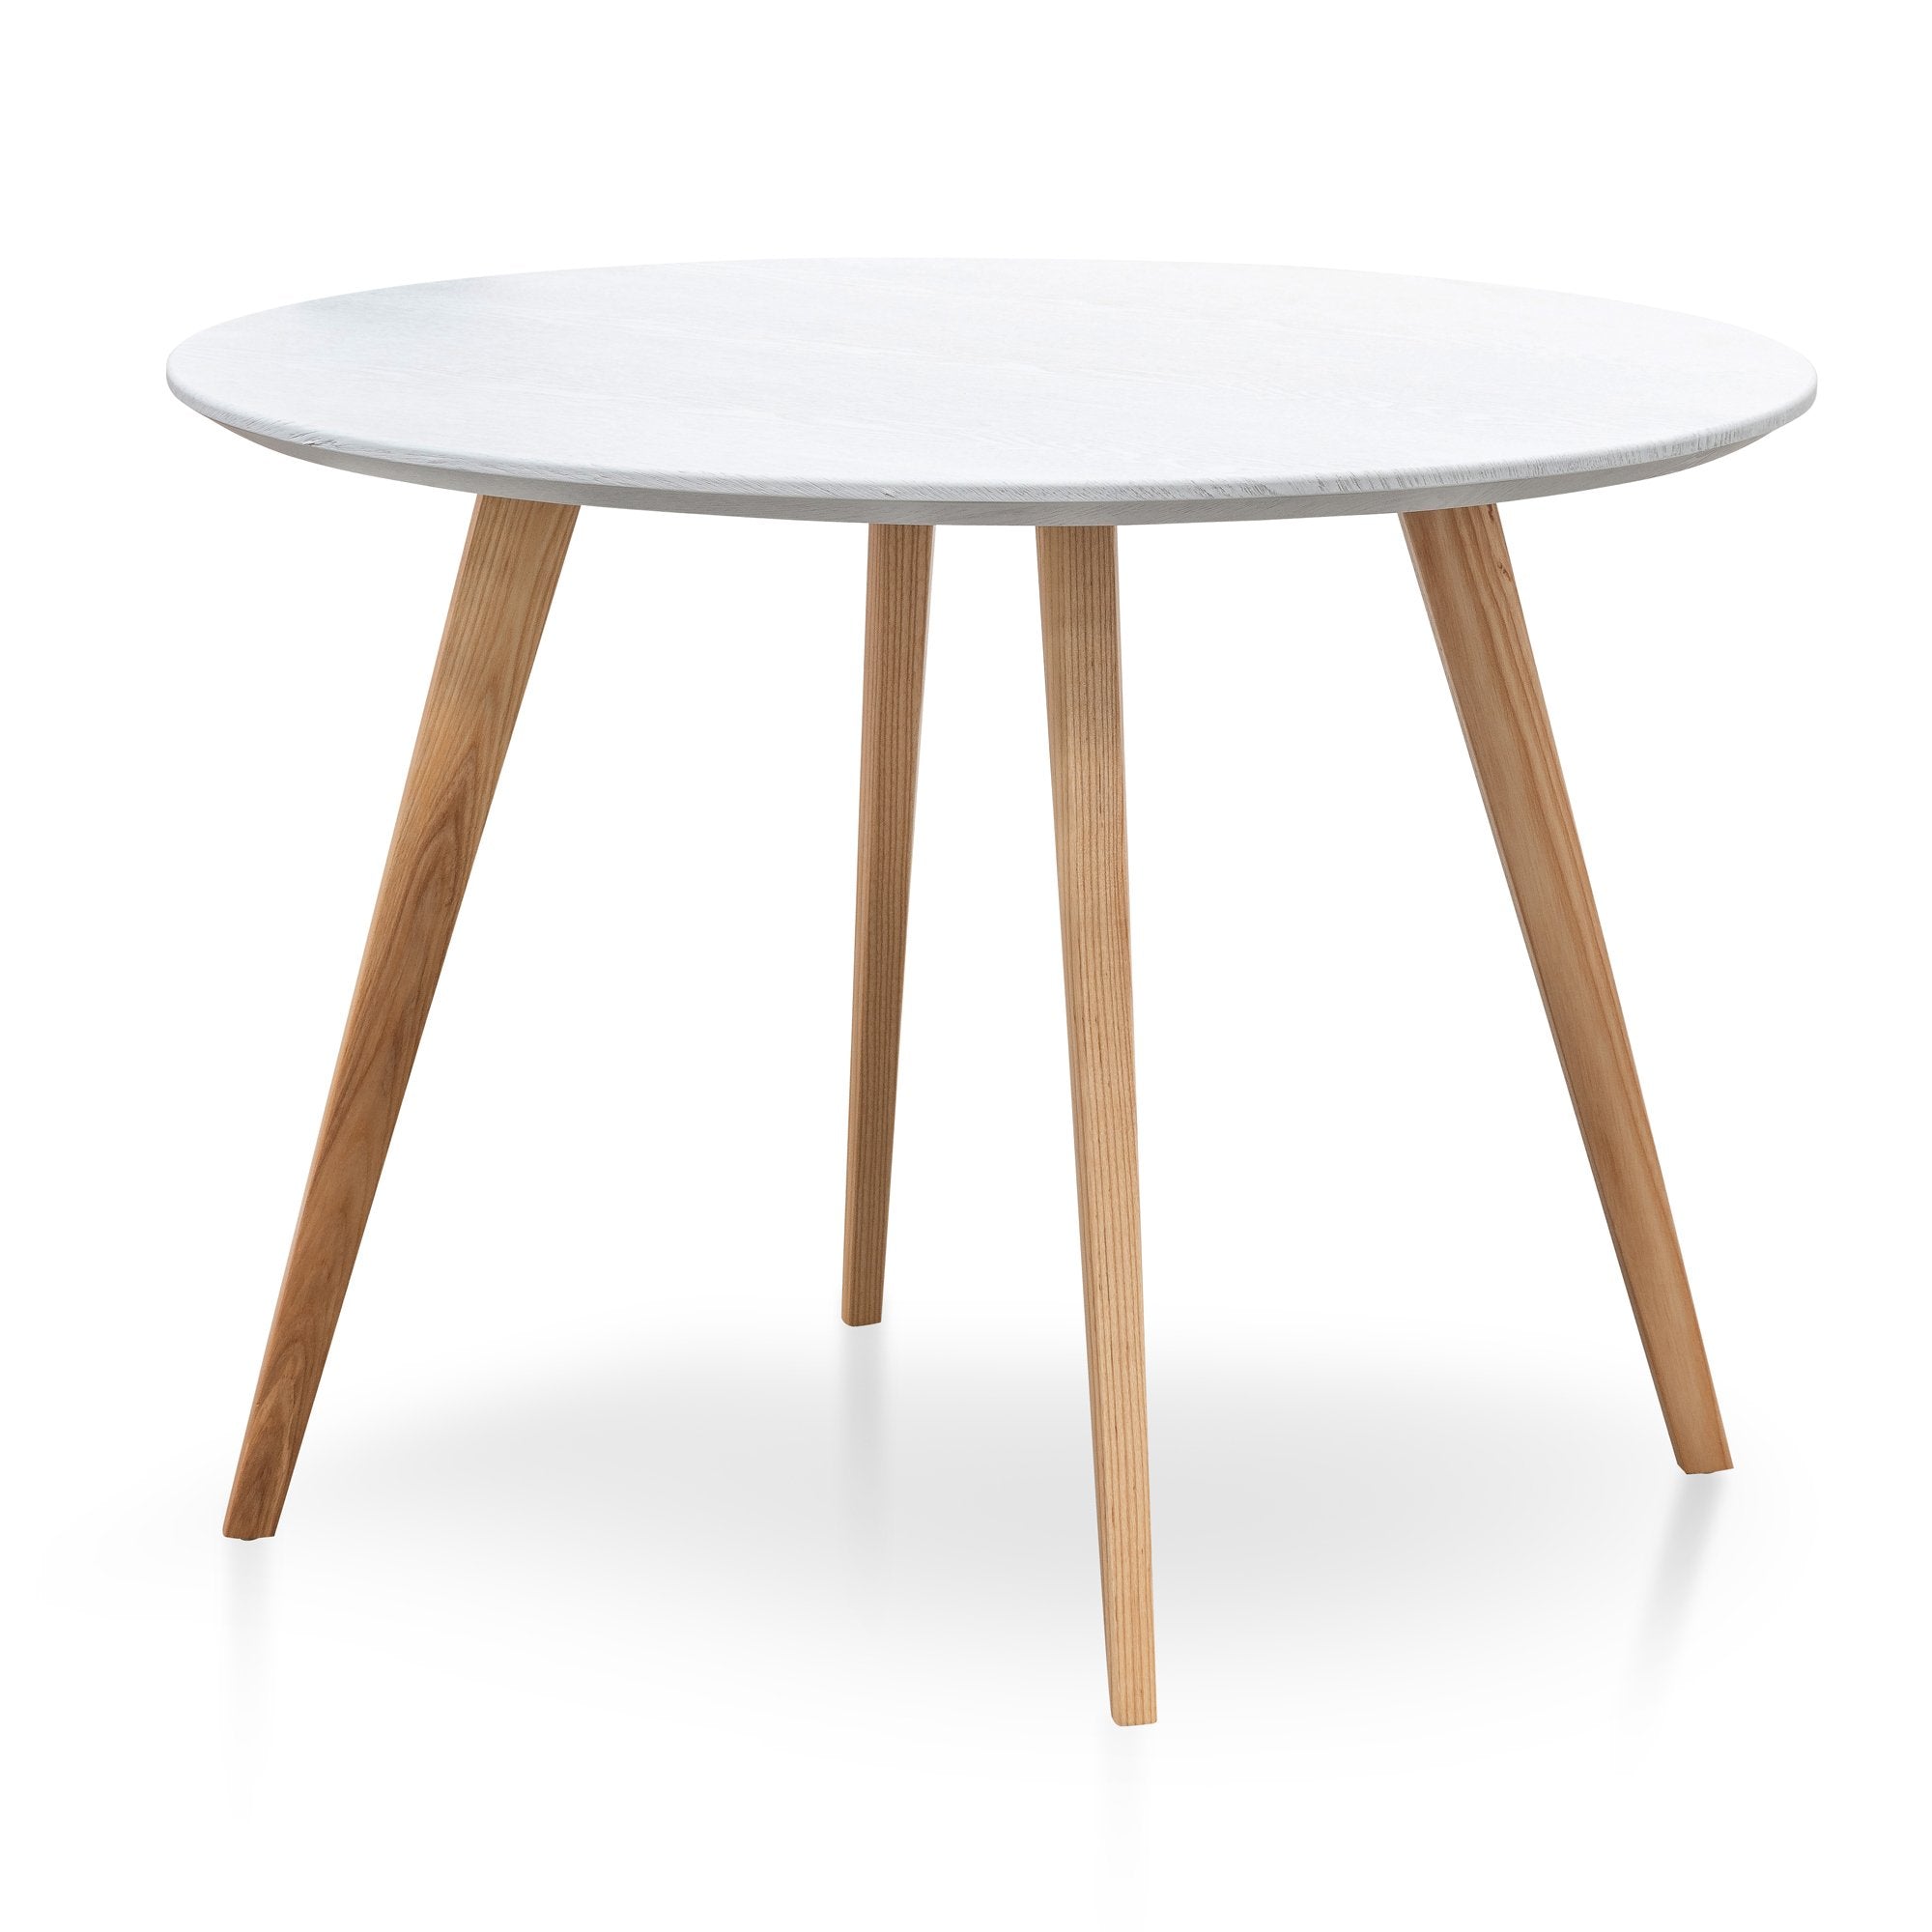 Gianna 100cm Round Dining Table - Washed White Top - NaturalLegs